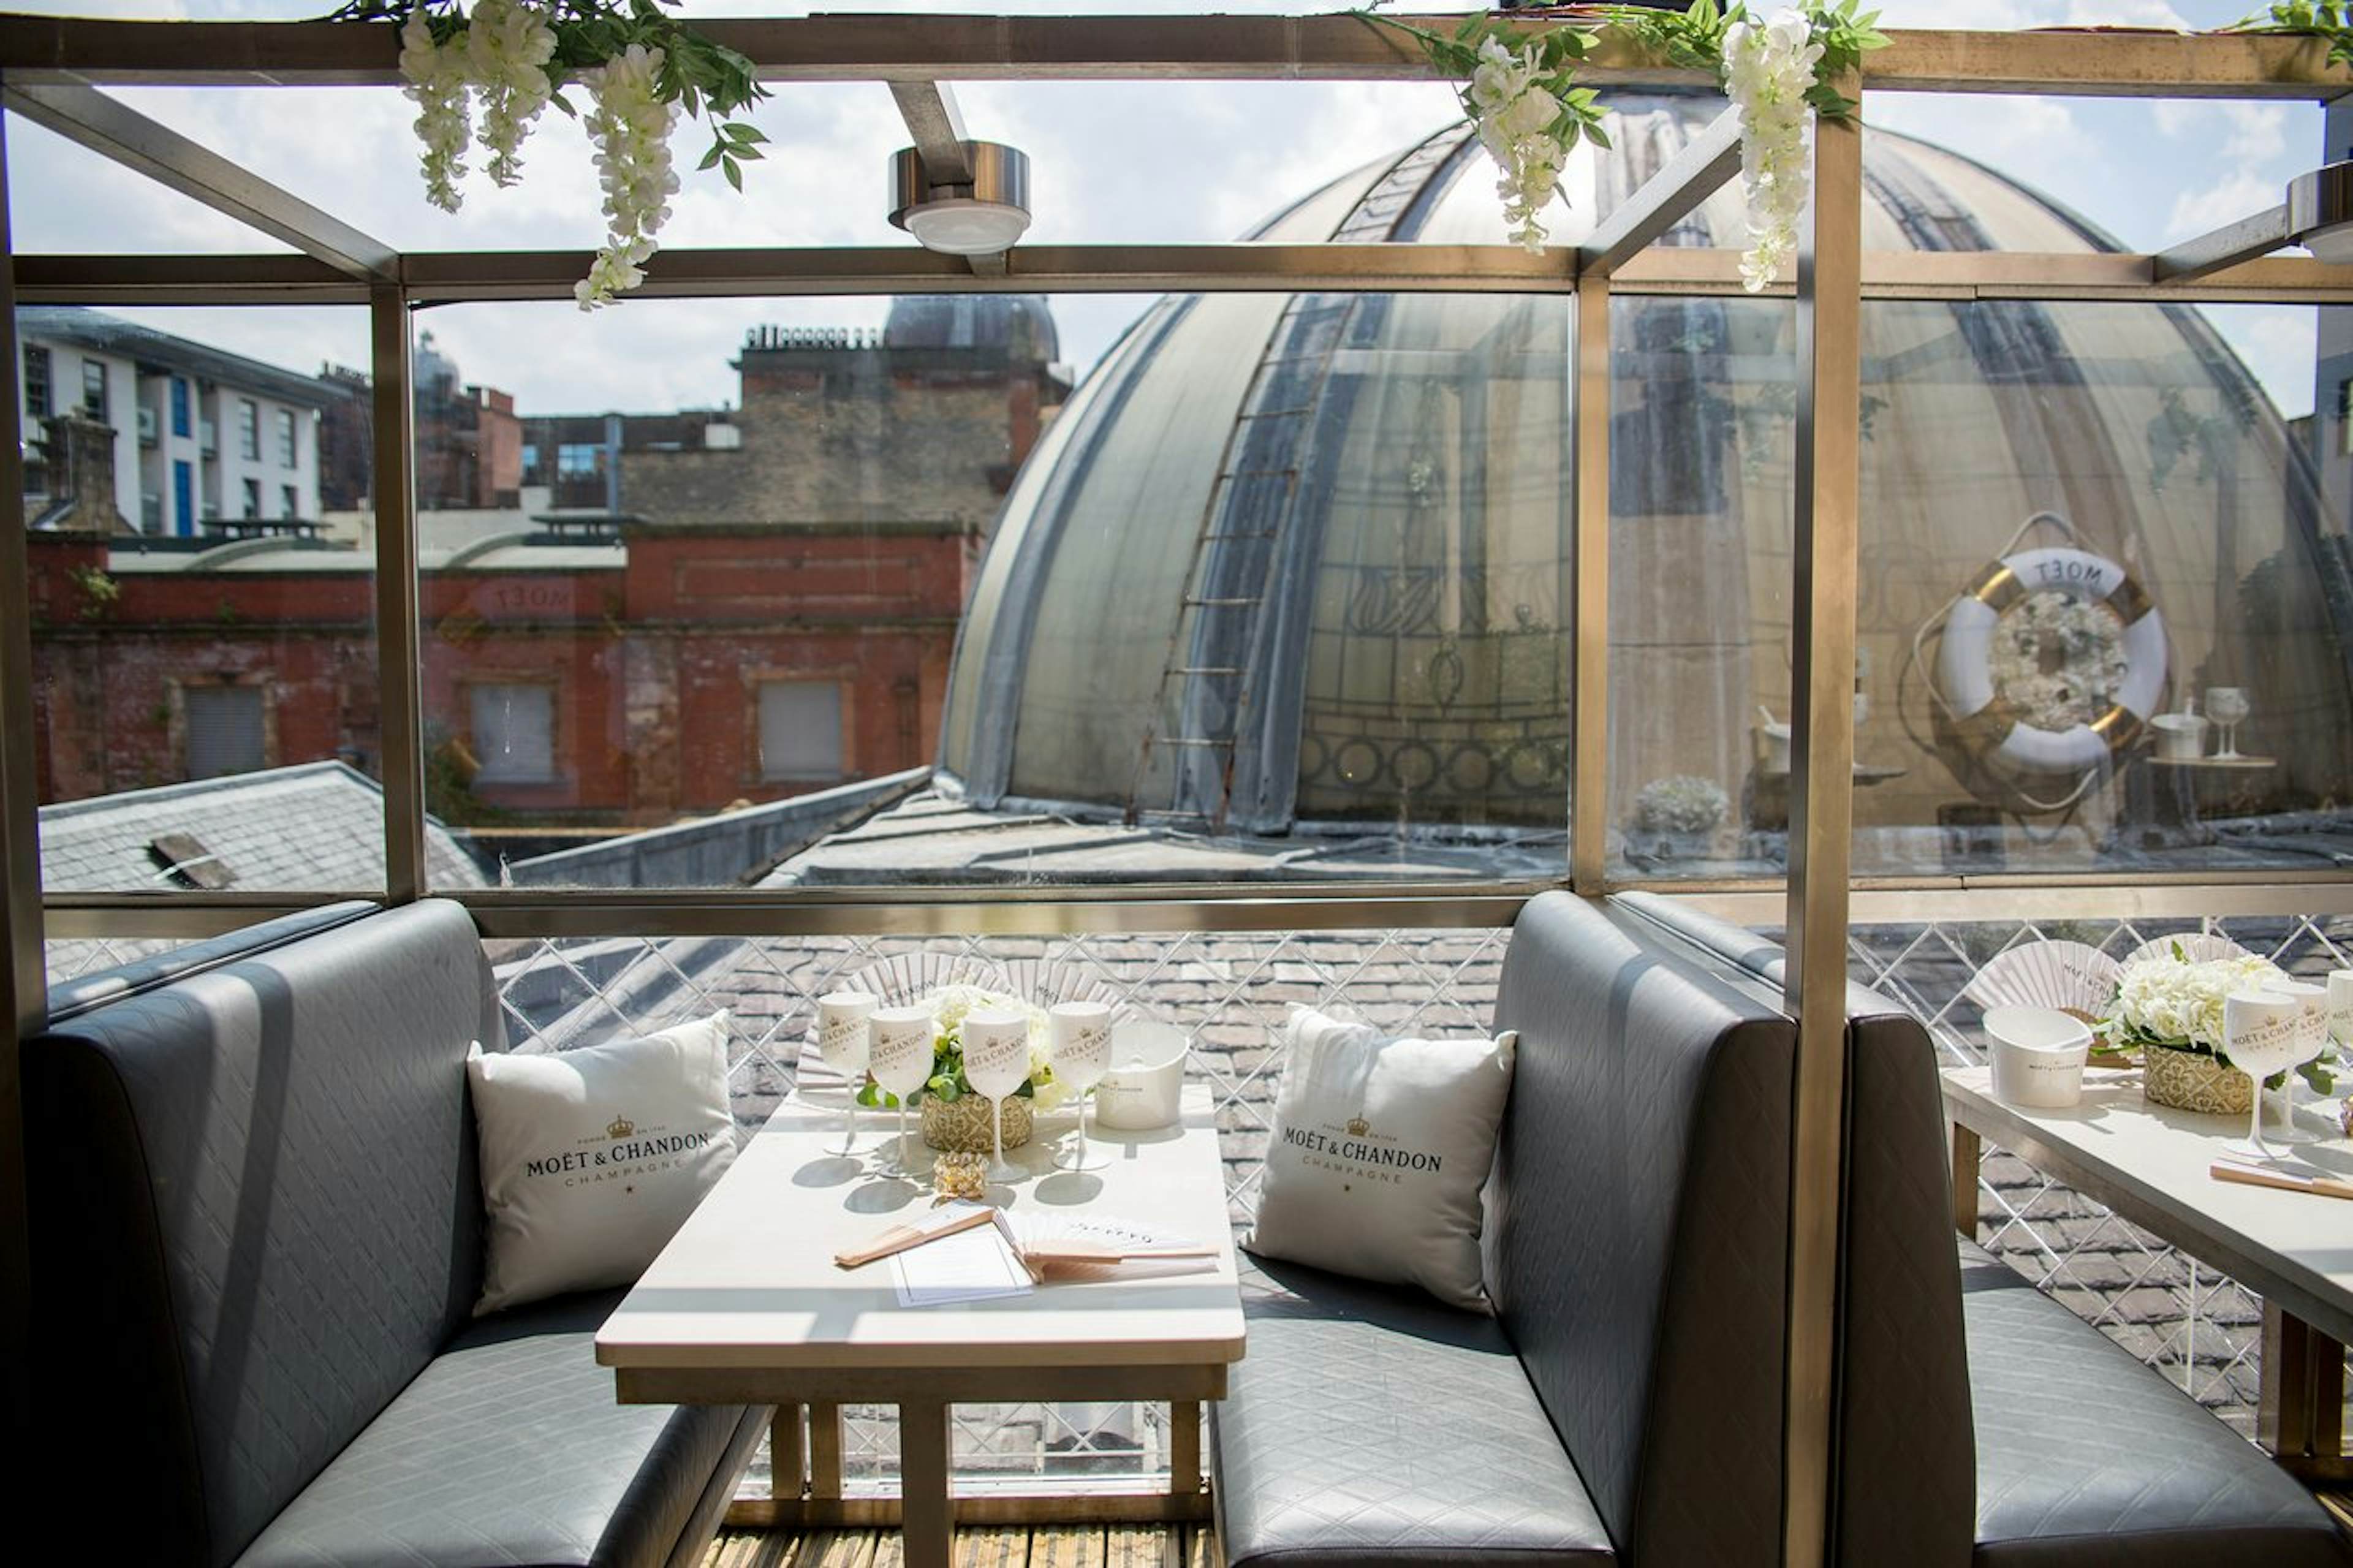 Al Fresco Dining on our Roof Terrace ...